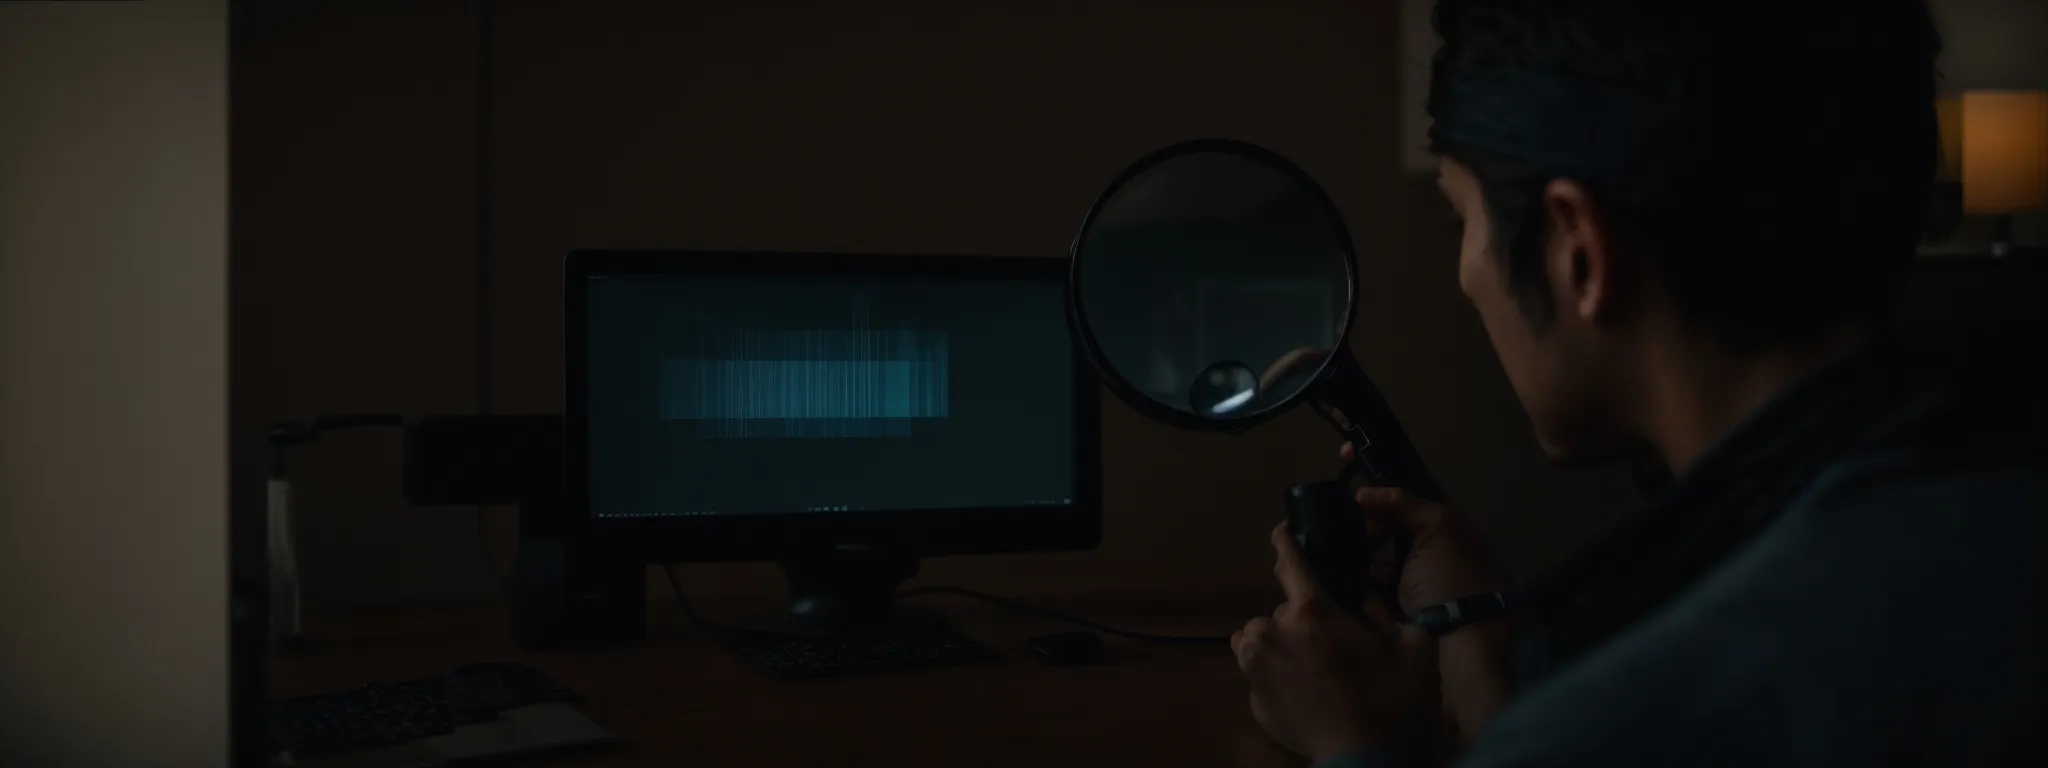 a detective peering through a large magnifying glass toward a computer screen displaying a search bar.